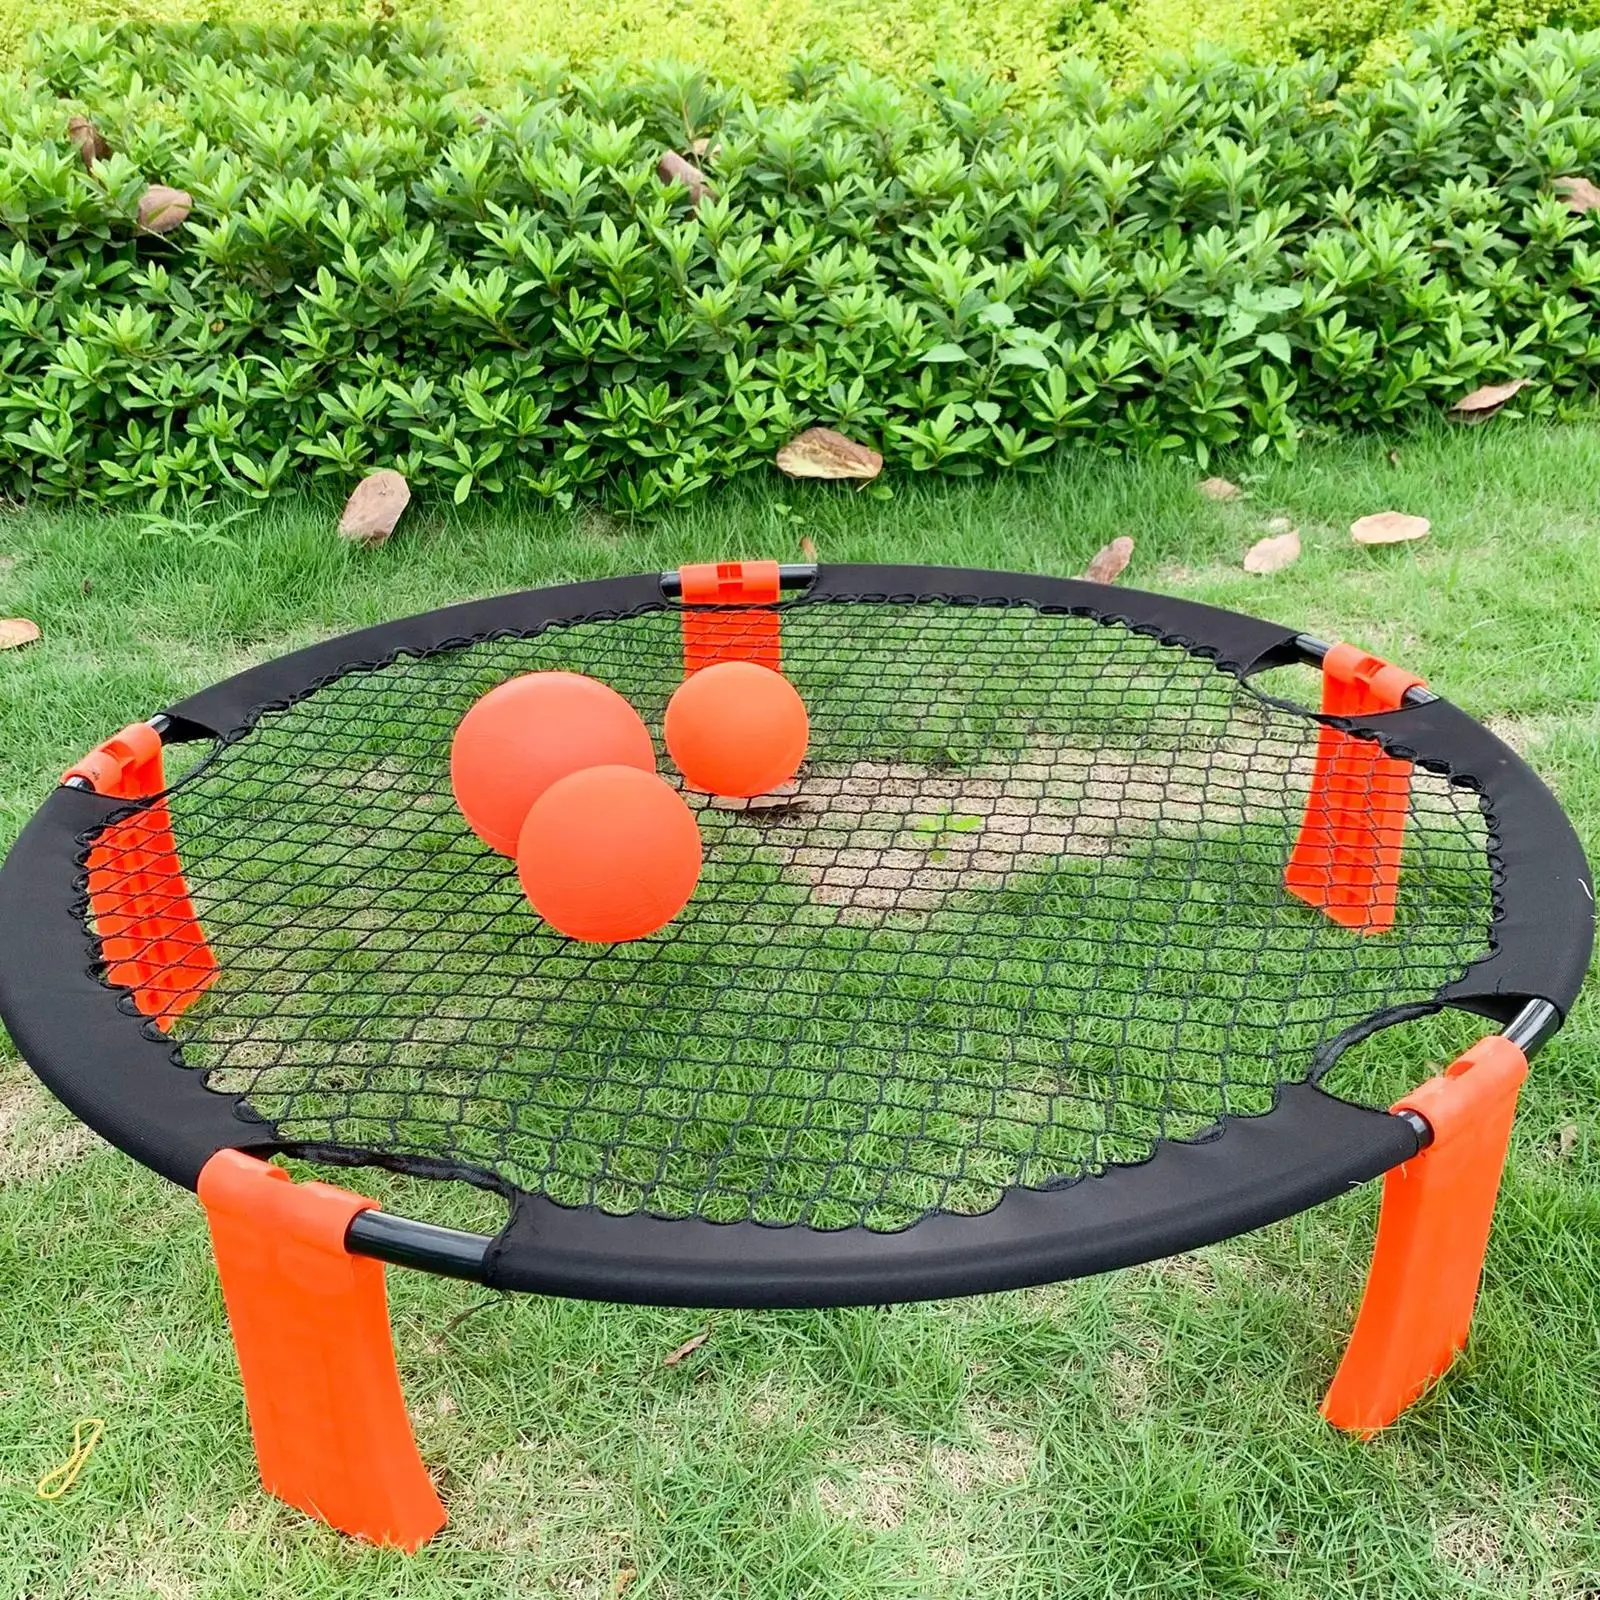 Outdoor Team Sports Mini Beach Volleyball Spike Game Balls Set Outdoor Entertainment Lawn Fitness Equipment Net With 3 Balls